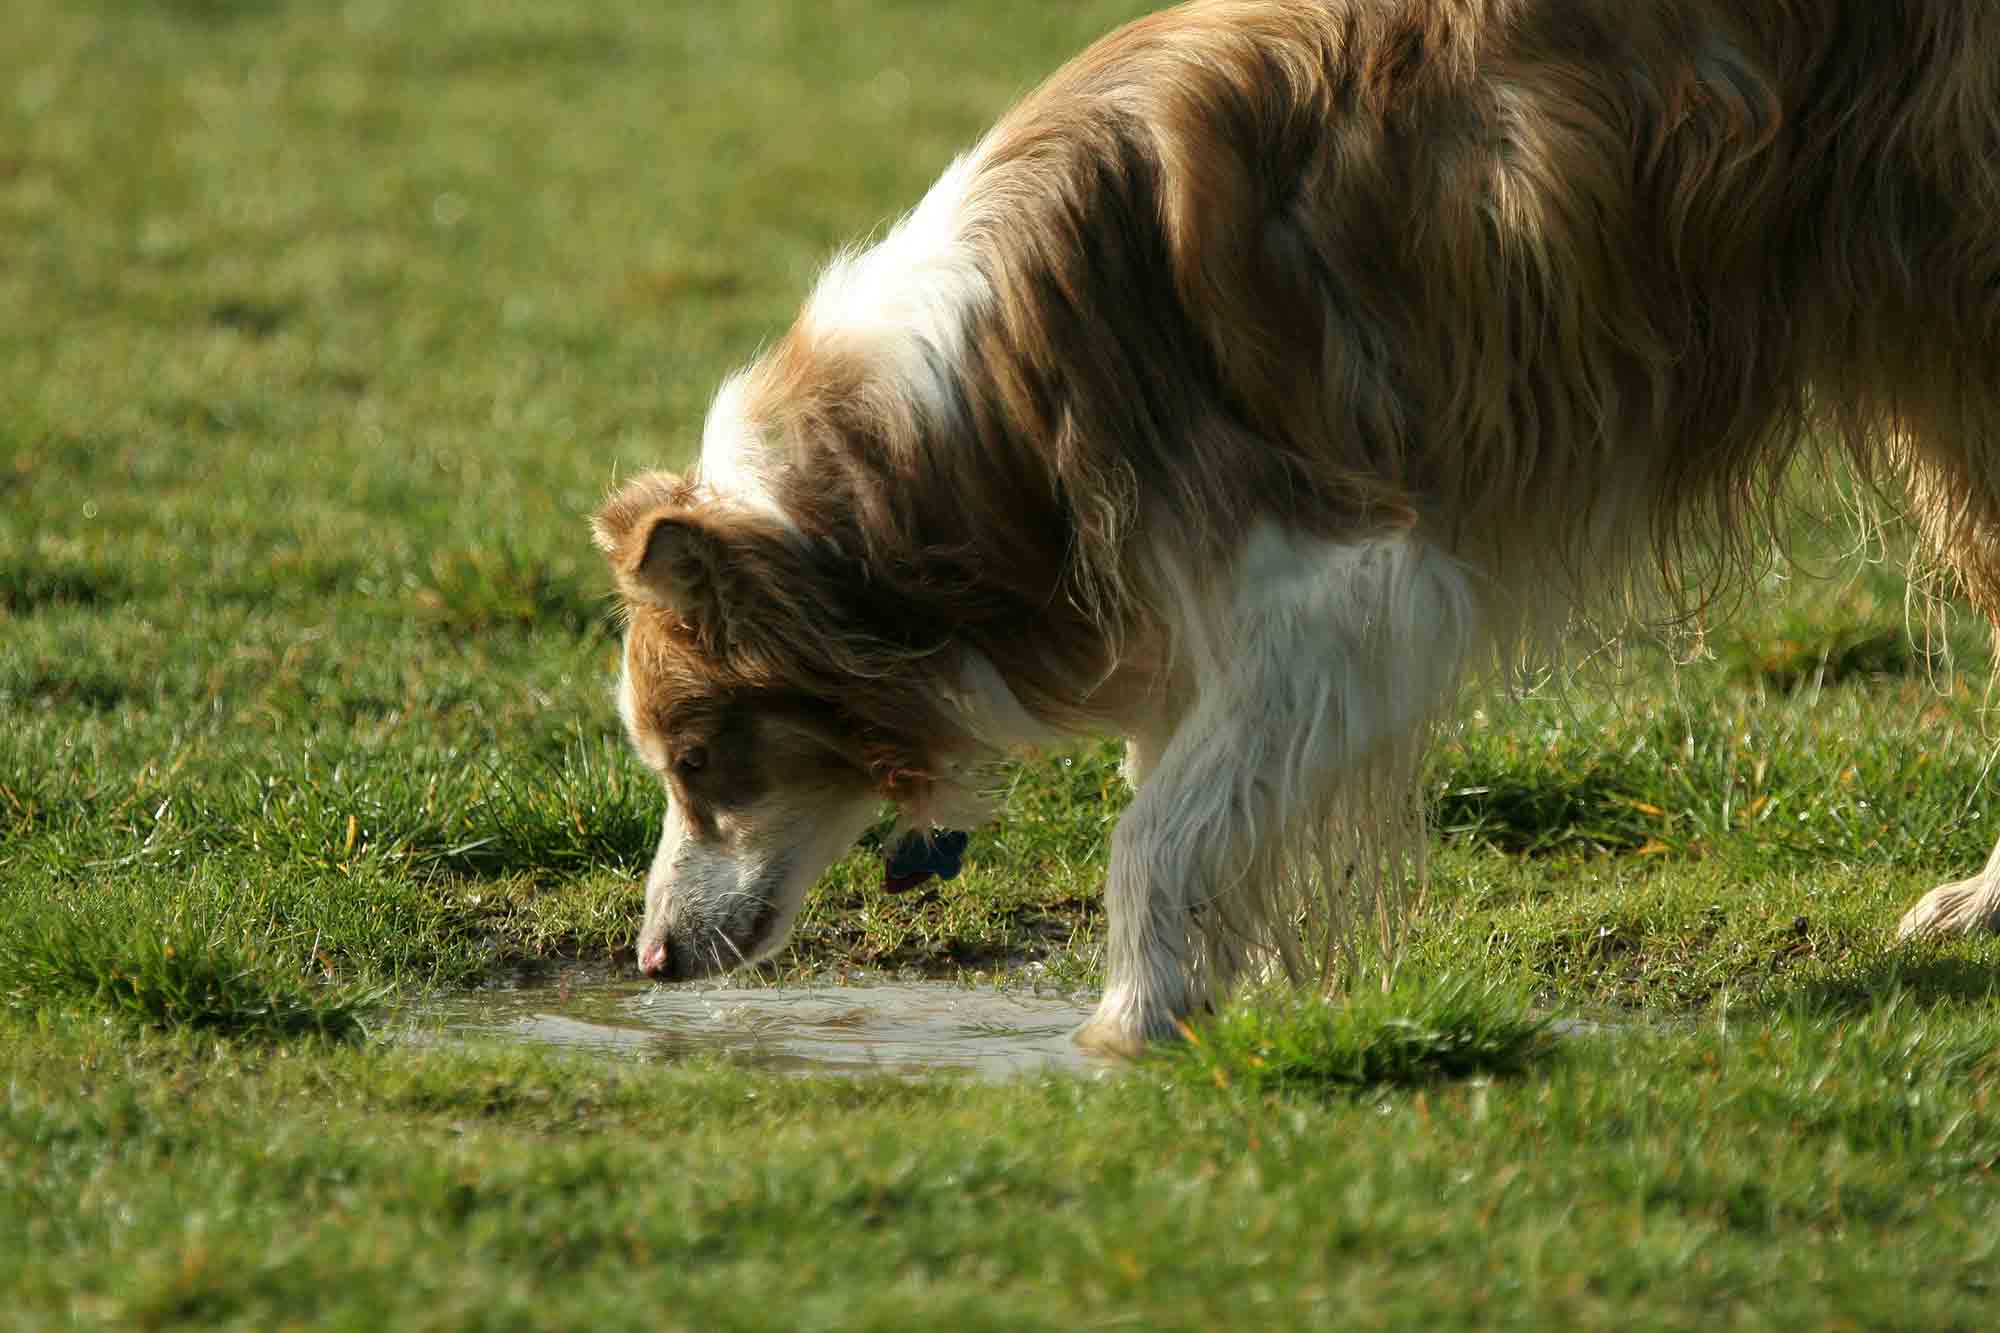 leptospirosis in dogs is a zoonotic disease that can affect both pet health and human health.